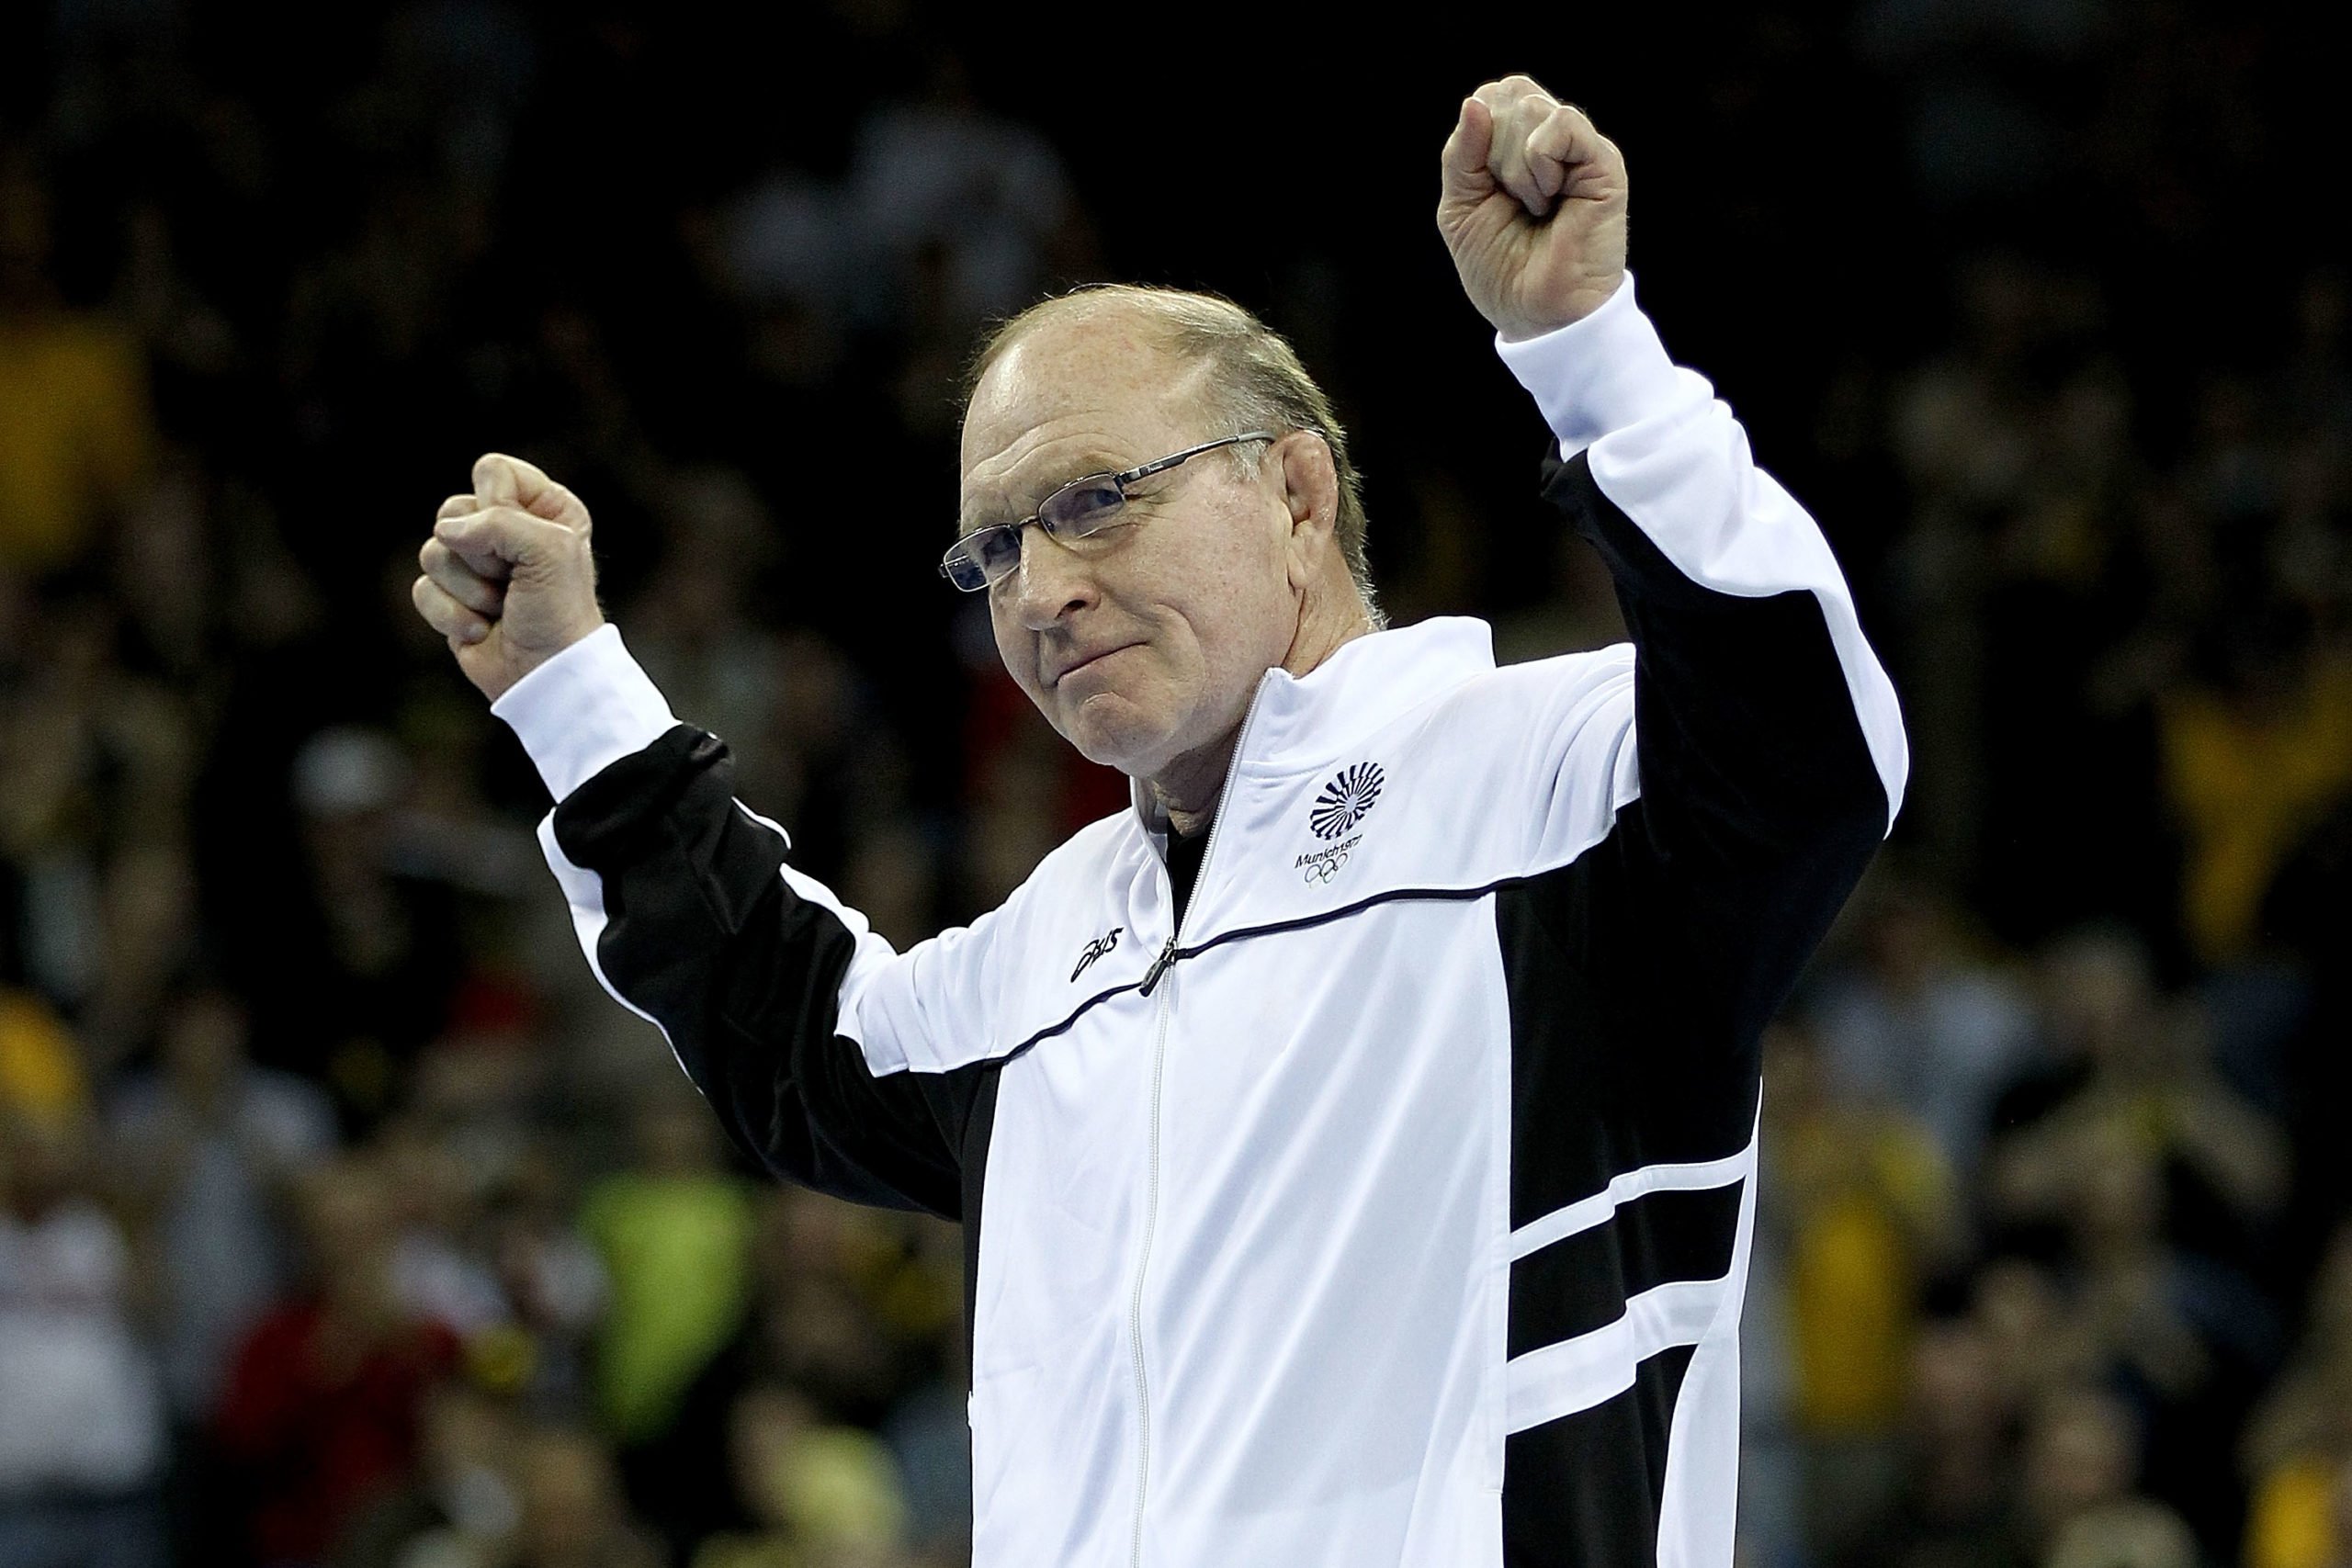 IOWA CITY, IA - APRIL 21: Dan Gable acknowledges the crowd after being introduced as part of the 1972 Olympic team during the finals of the US Wrestling Olympic Trials at Carver Hawkeye Arena on April 21, 2012 in Iowa City, Iowa. (Photo by Matthew Stockman/Getty Images)